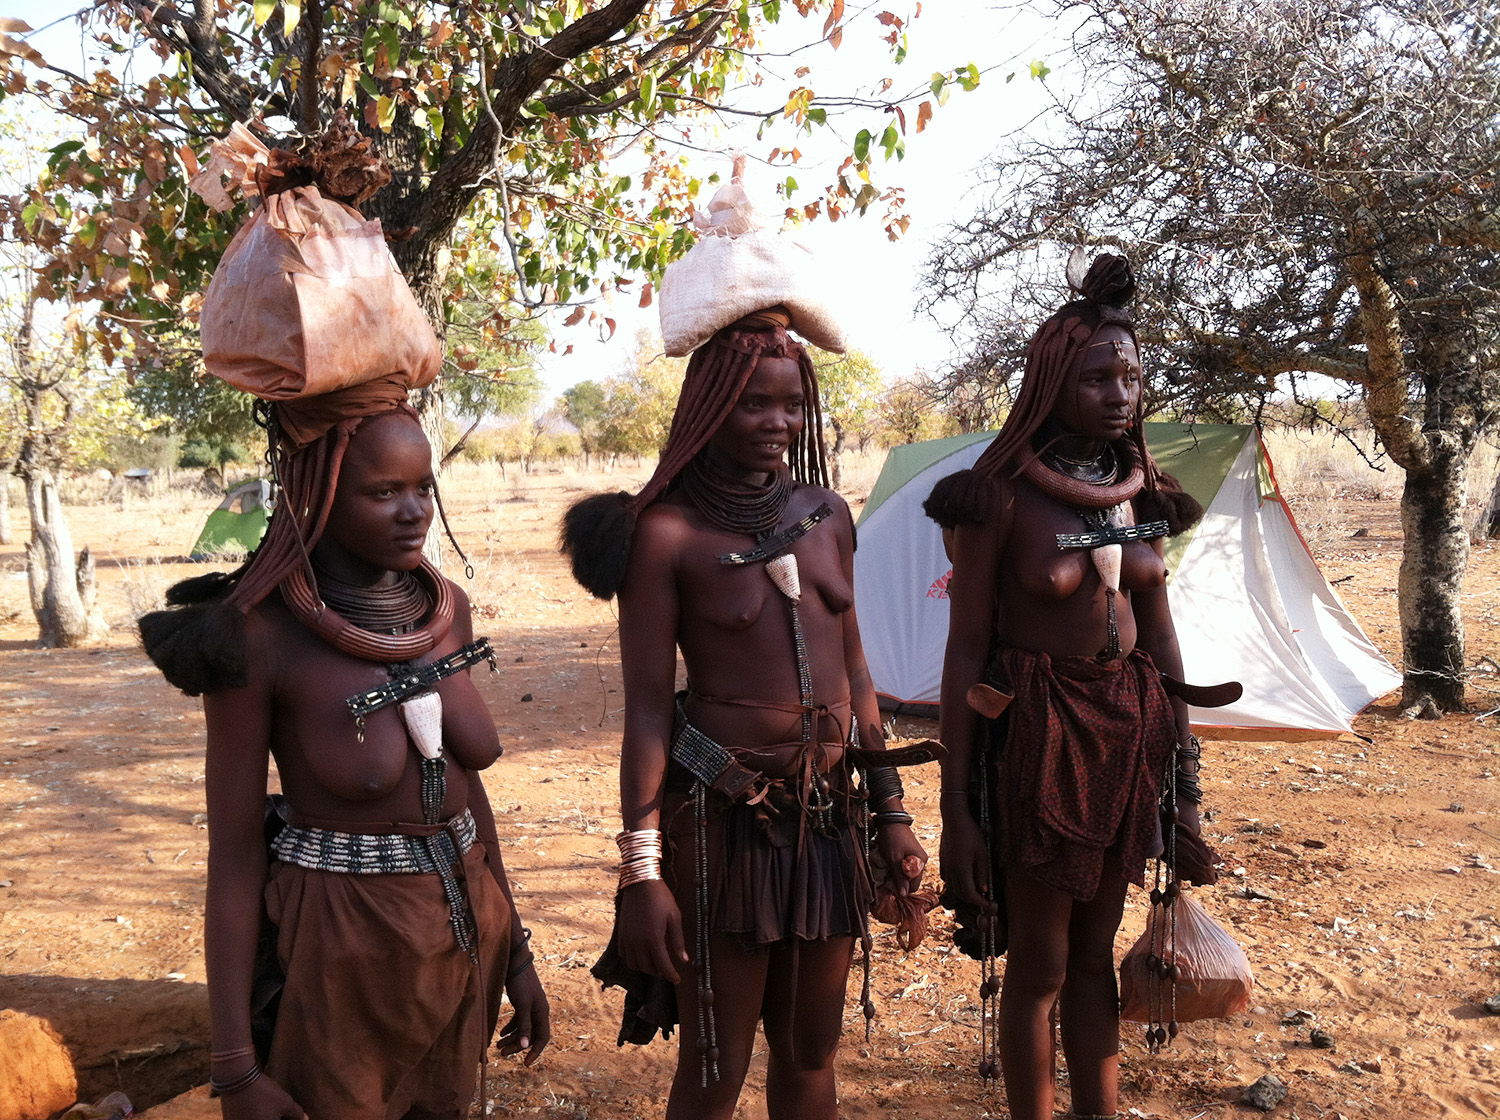 Members of the Himba population